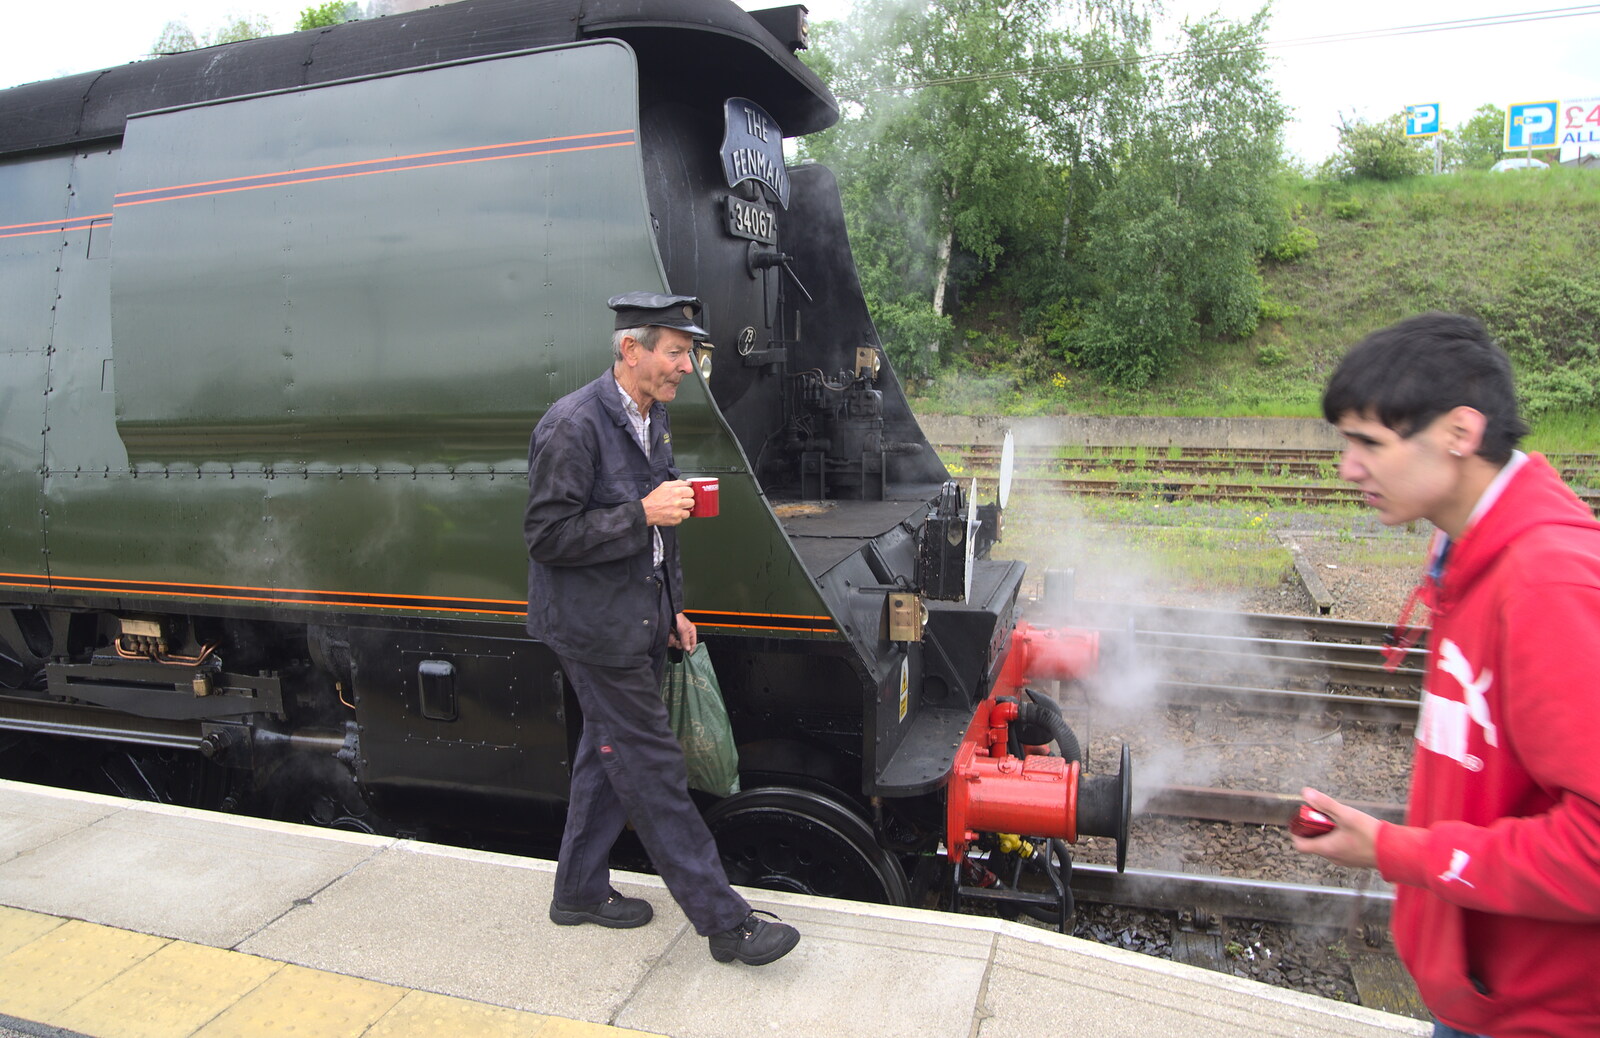 The driver goes to tell people off from Tangmere at Norwich Station, Norwich, Norfolk - 25th May 2013